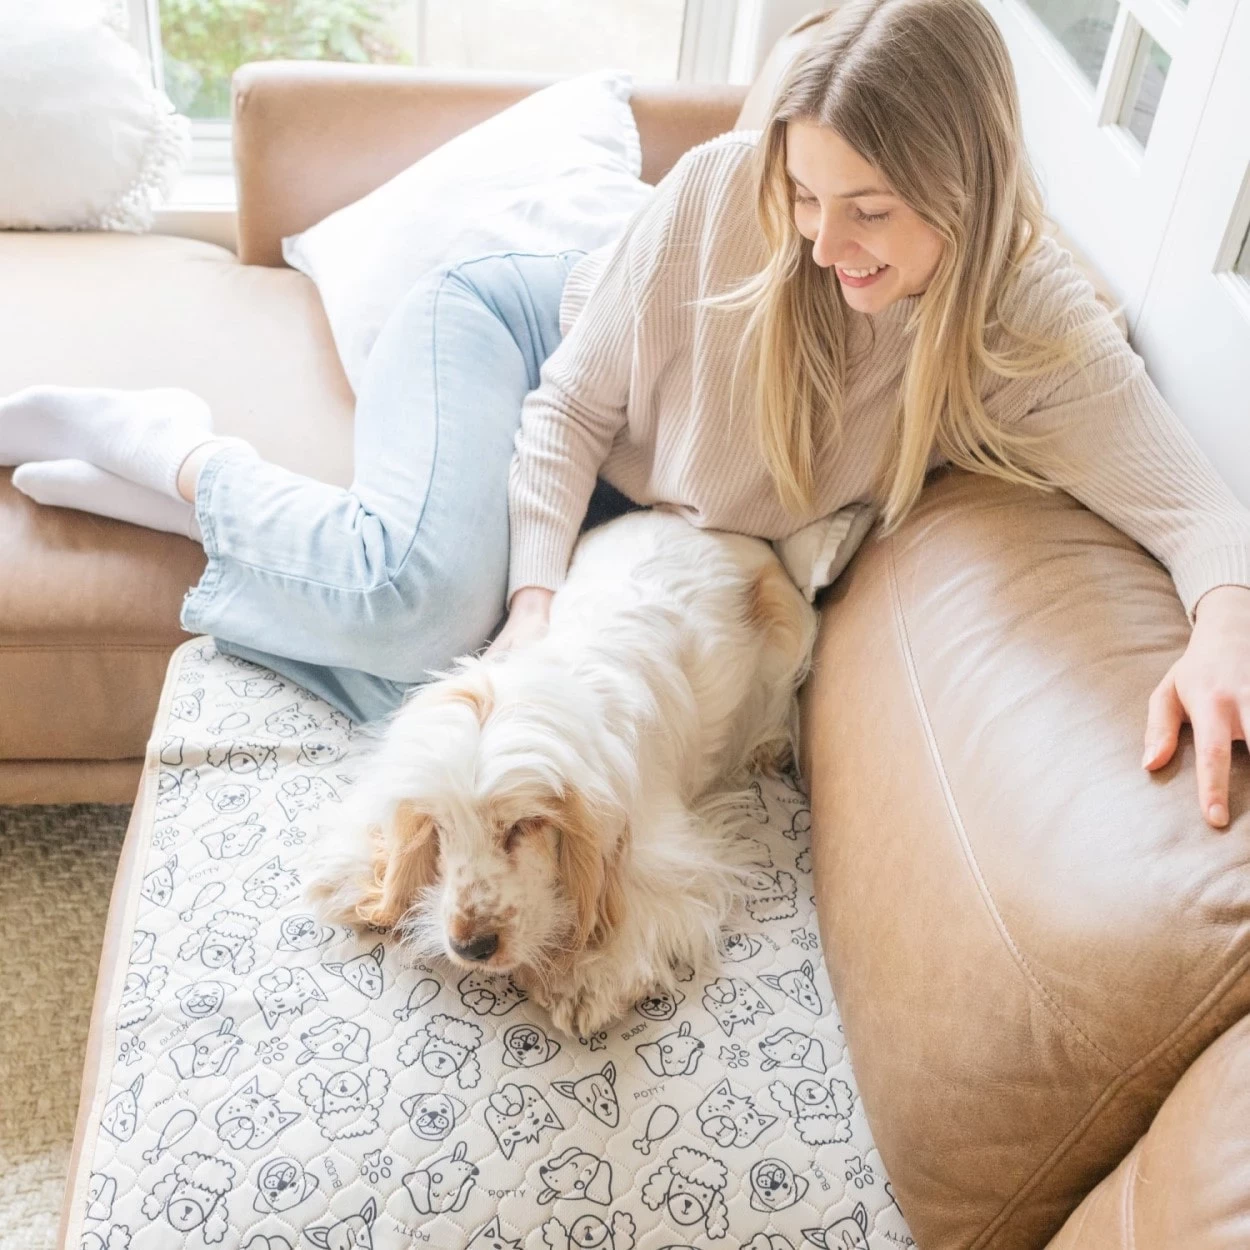 A girl and her old dog relaxing on the couch, with the dog on a reusable potty pad